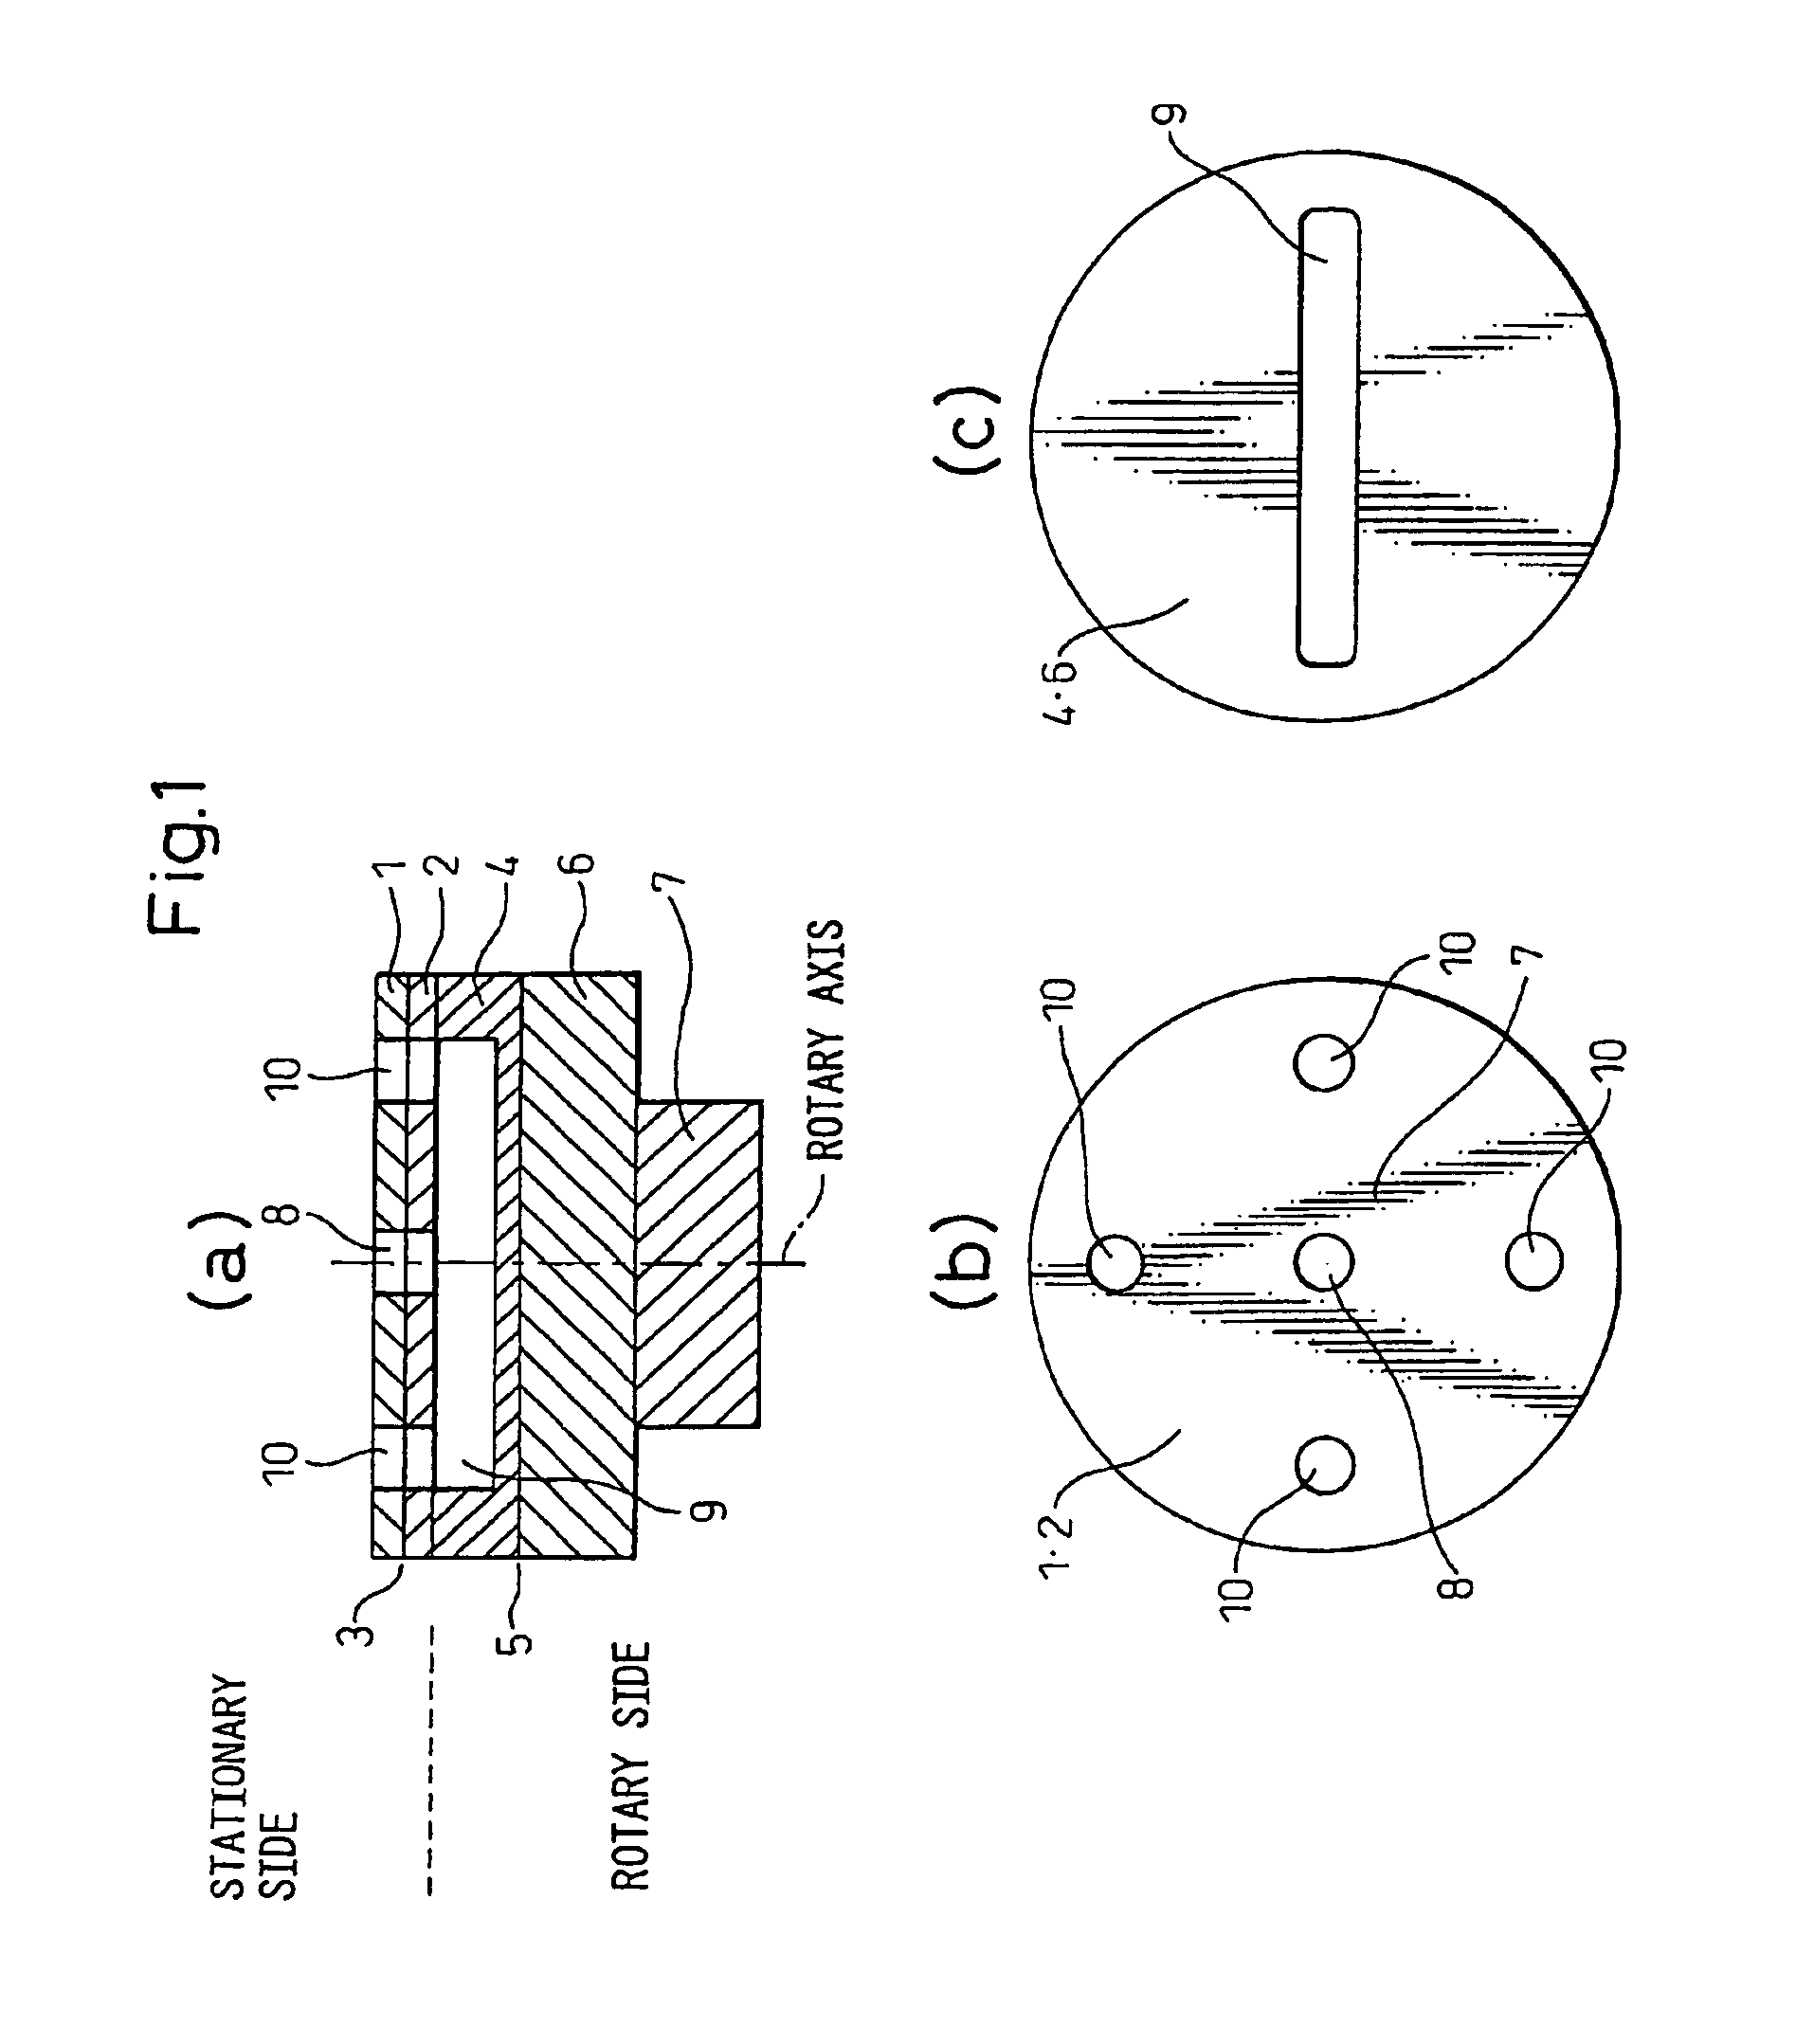 Rotary-valve and adsorption separation system